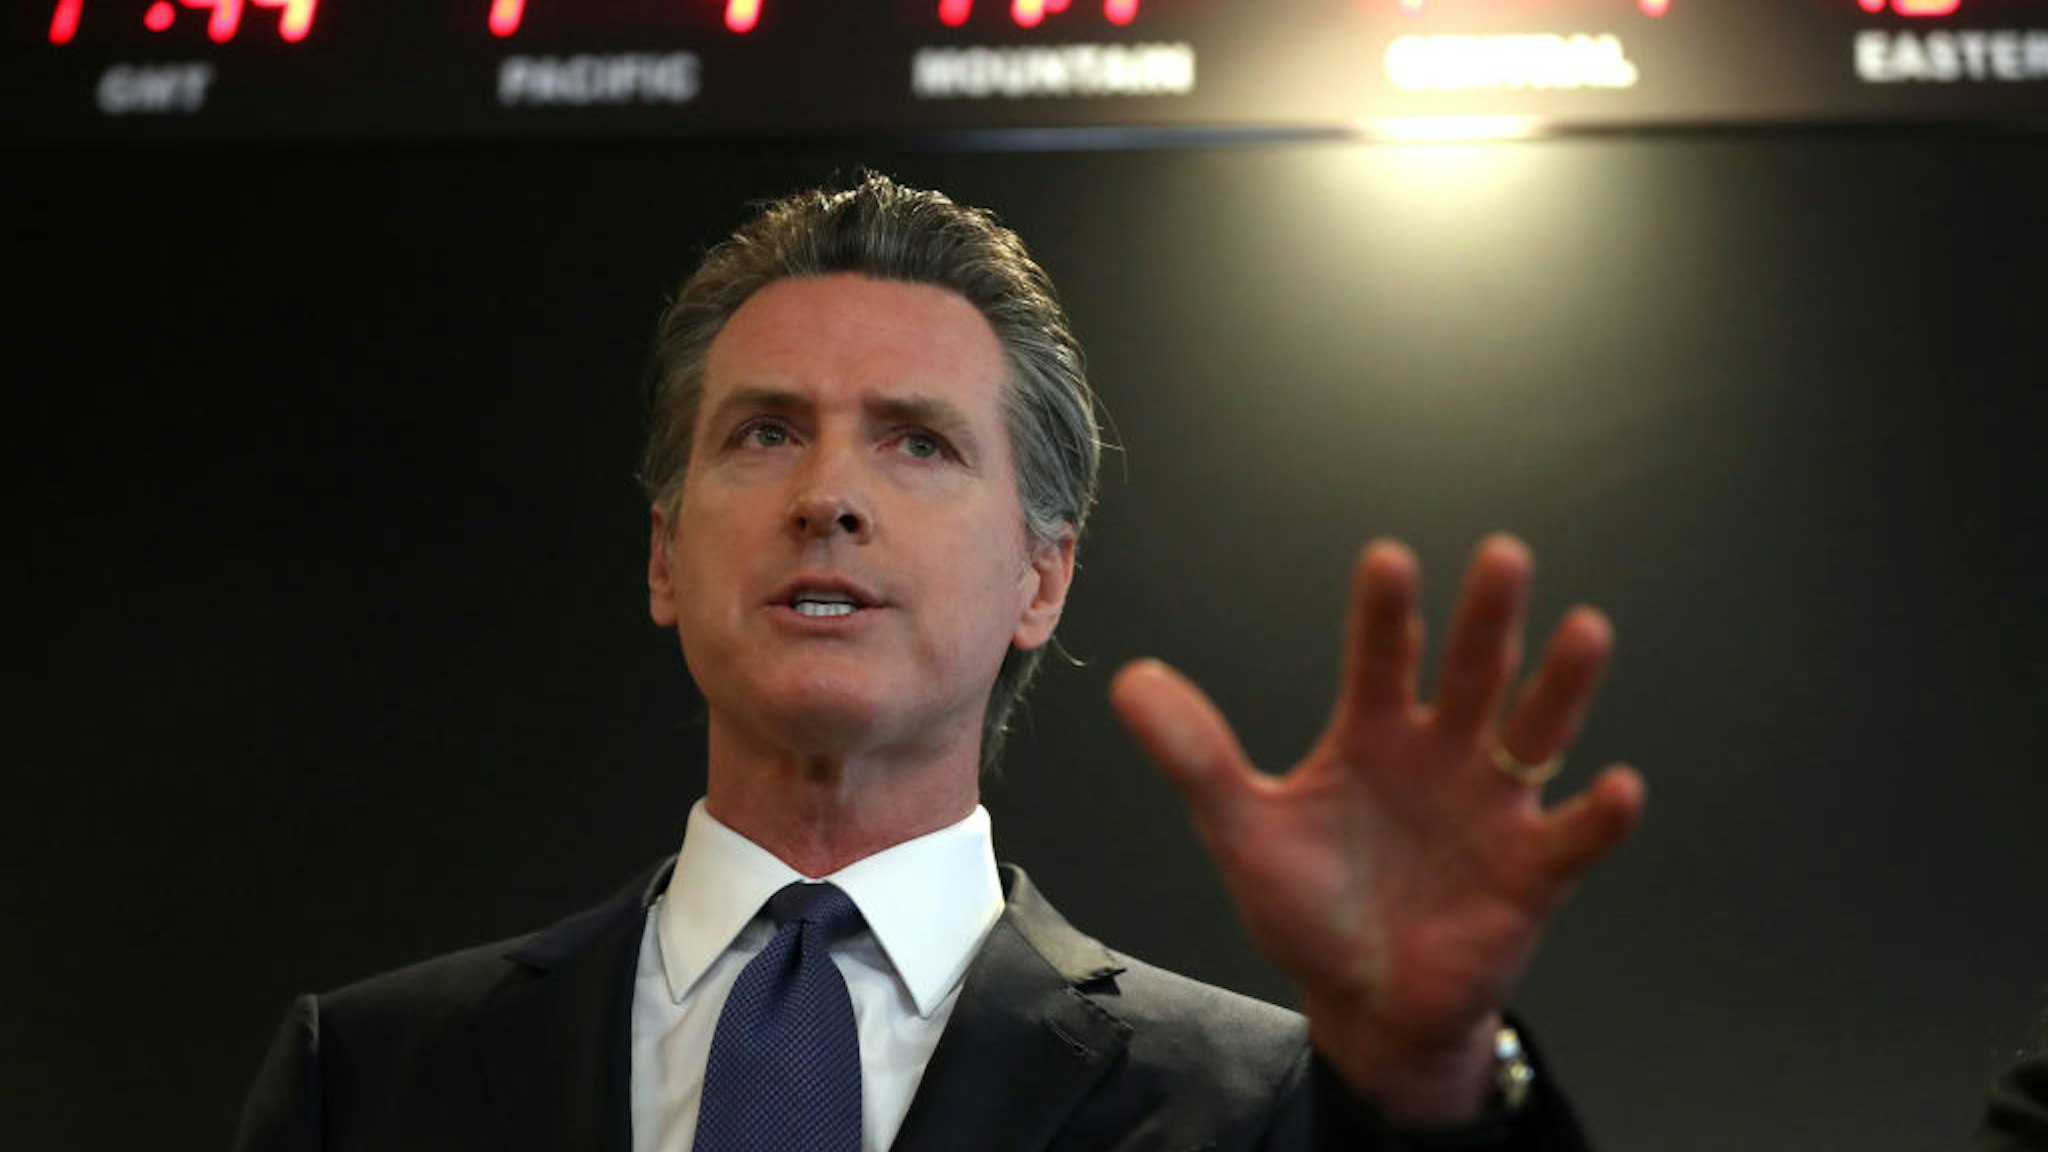 SACRAMENTO, CALIFORNIA - FEBRUARY 27: California Gov. Gavin Newsom speaks during a news conference at the California Department of Public Health on February 27, 2020 in Sacramento, California. California Gov. Gavin Newsom joined State health officials to an update to the public about the state's response to the Coronavirus known as COVID-19 a day after a possible first case of person-to-person transmission was reported in Northern California. (Photo by Justin Sullivan/Getty Images)